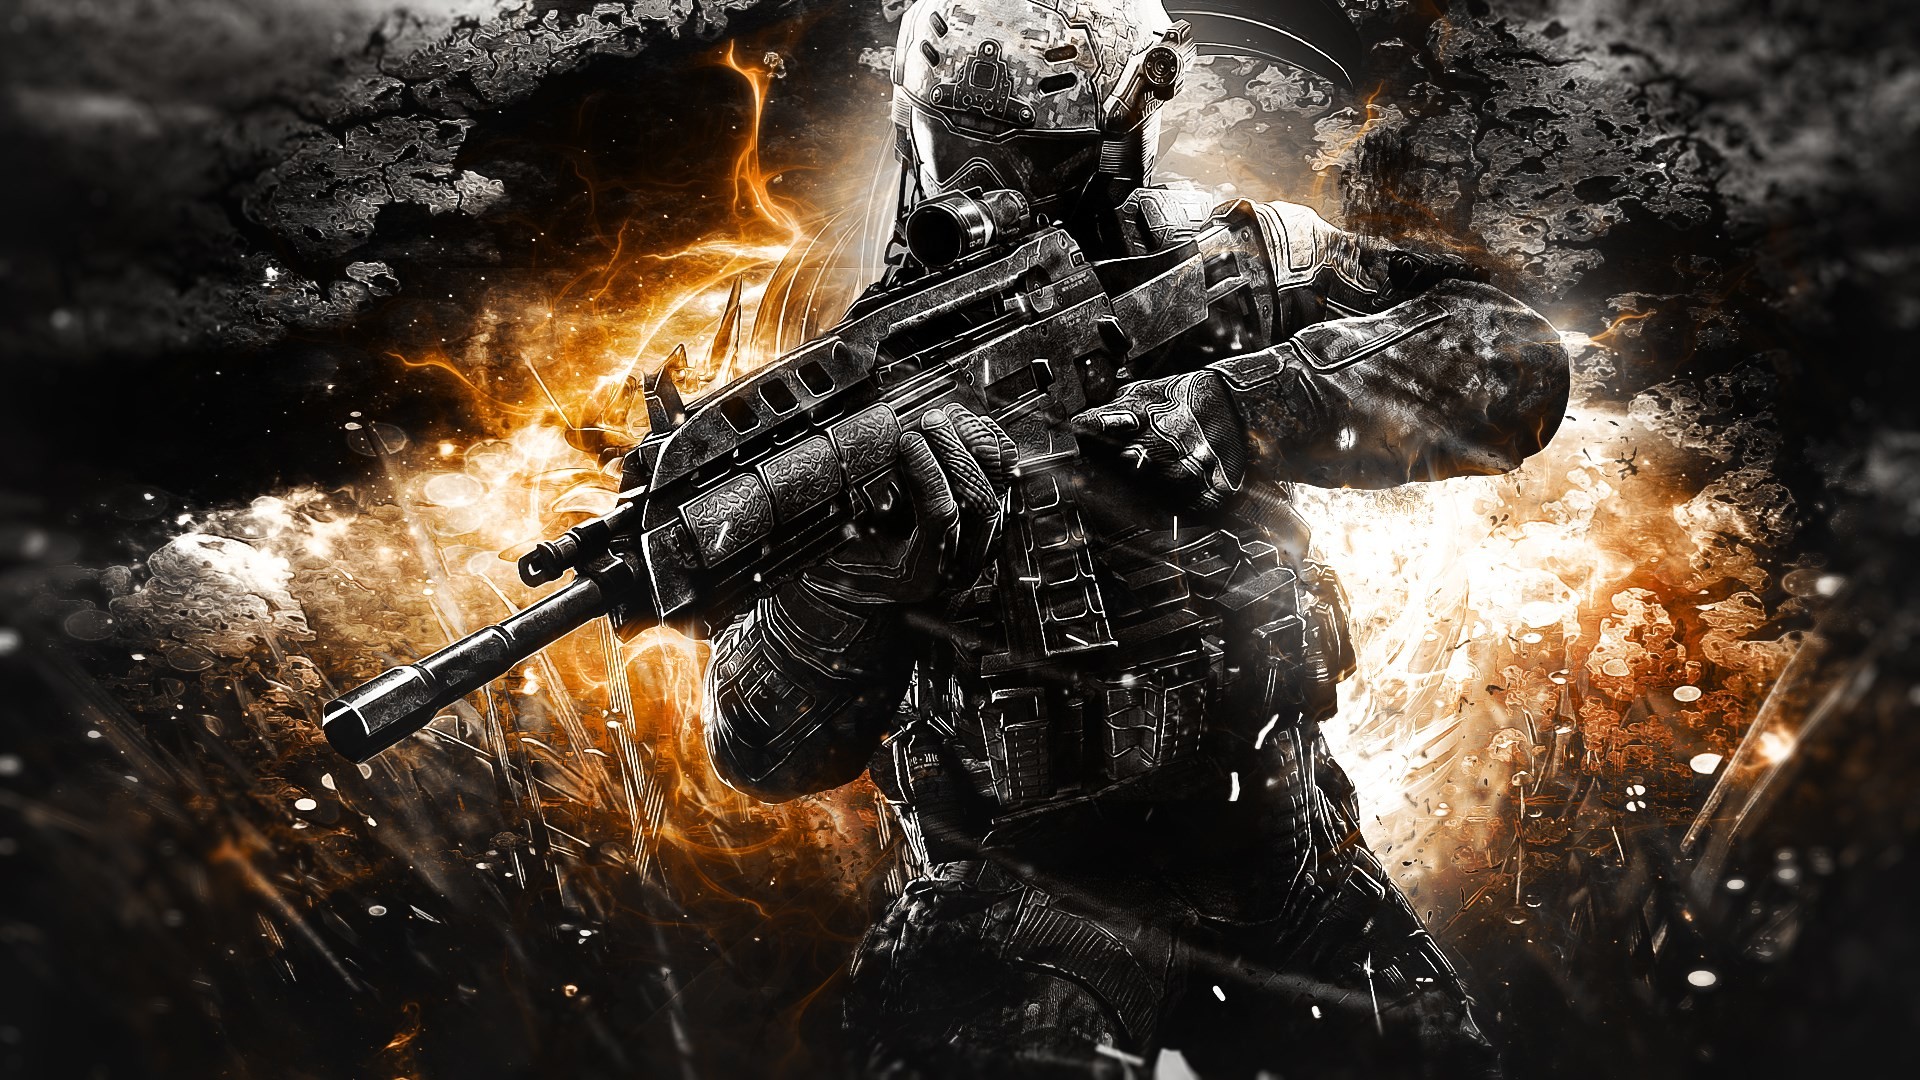 1920x1080 Call of Duty Black Ops 2 Awesome Wallpaper by TheSyanArt on